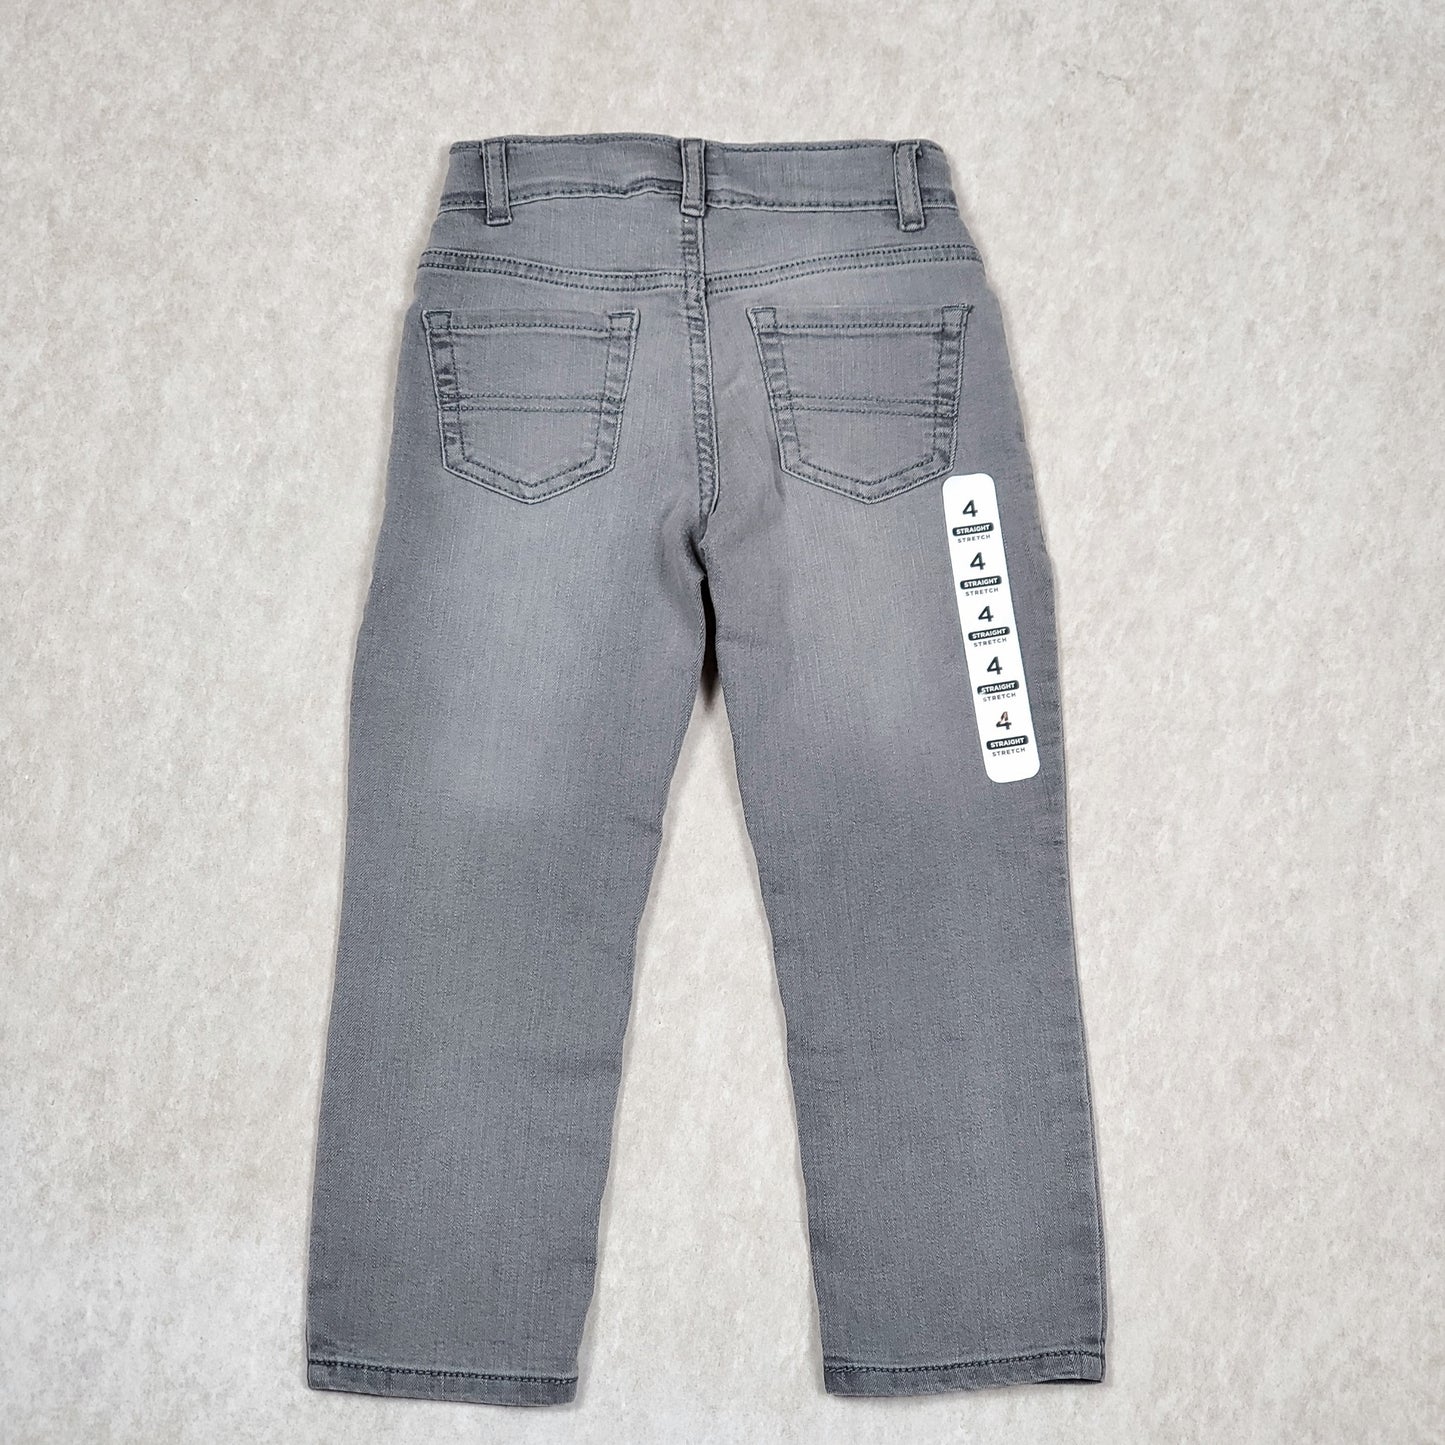 Childrens Place Boys Grey Jeans Size 4 NWT View 2